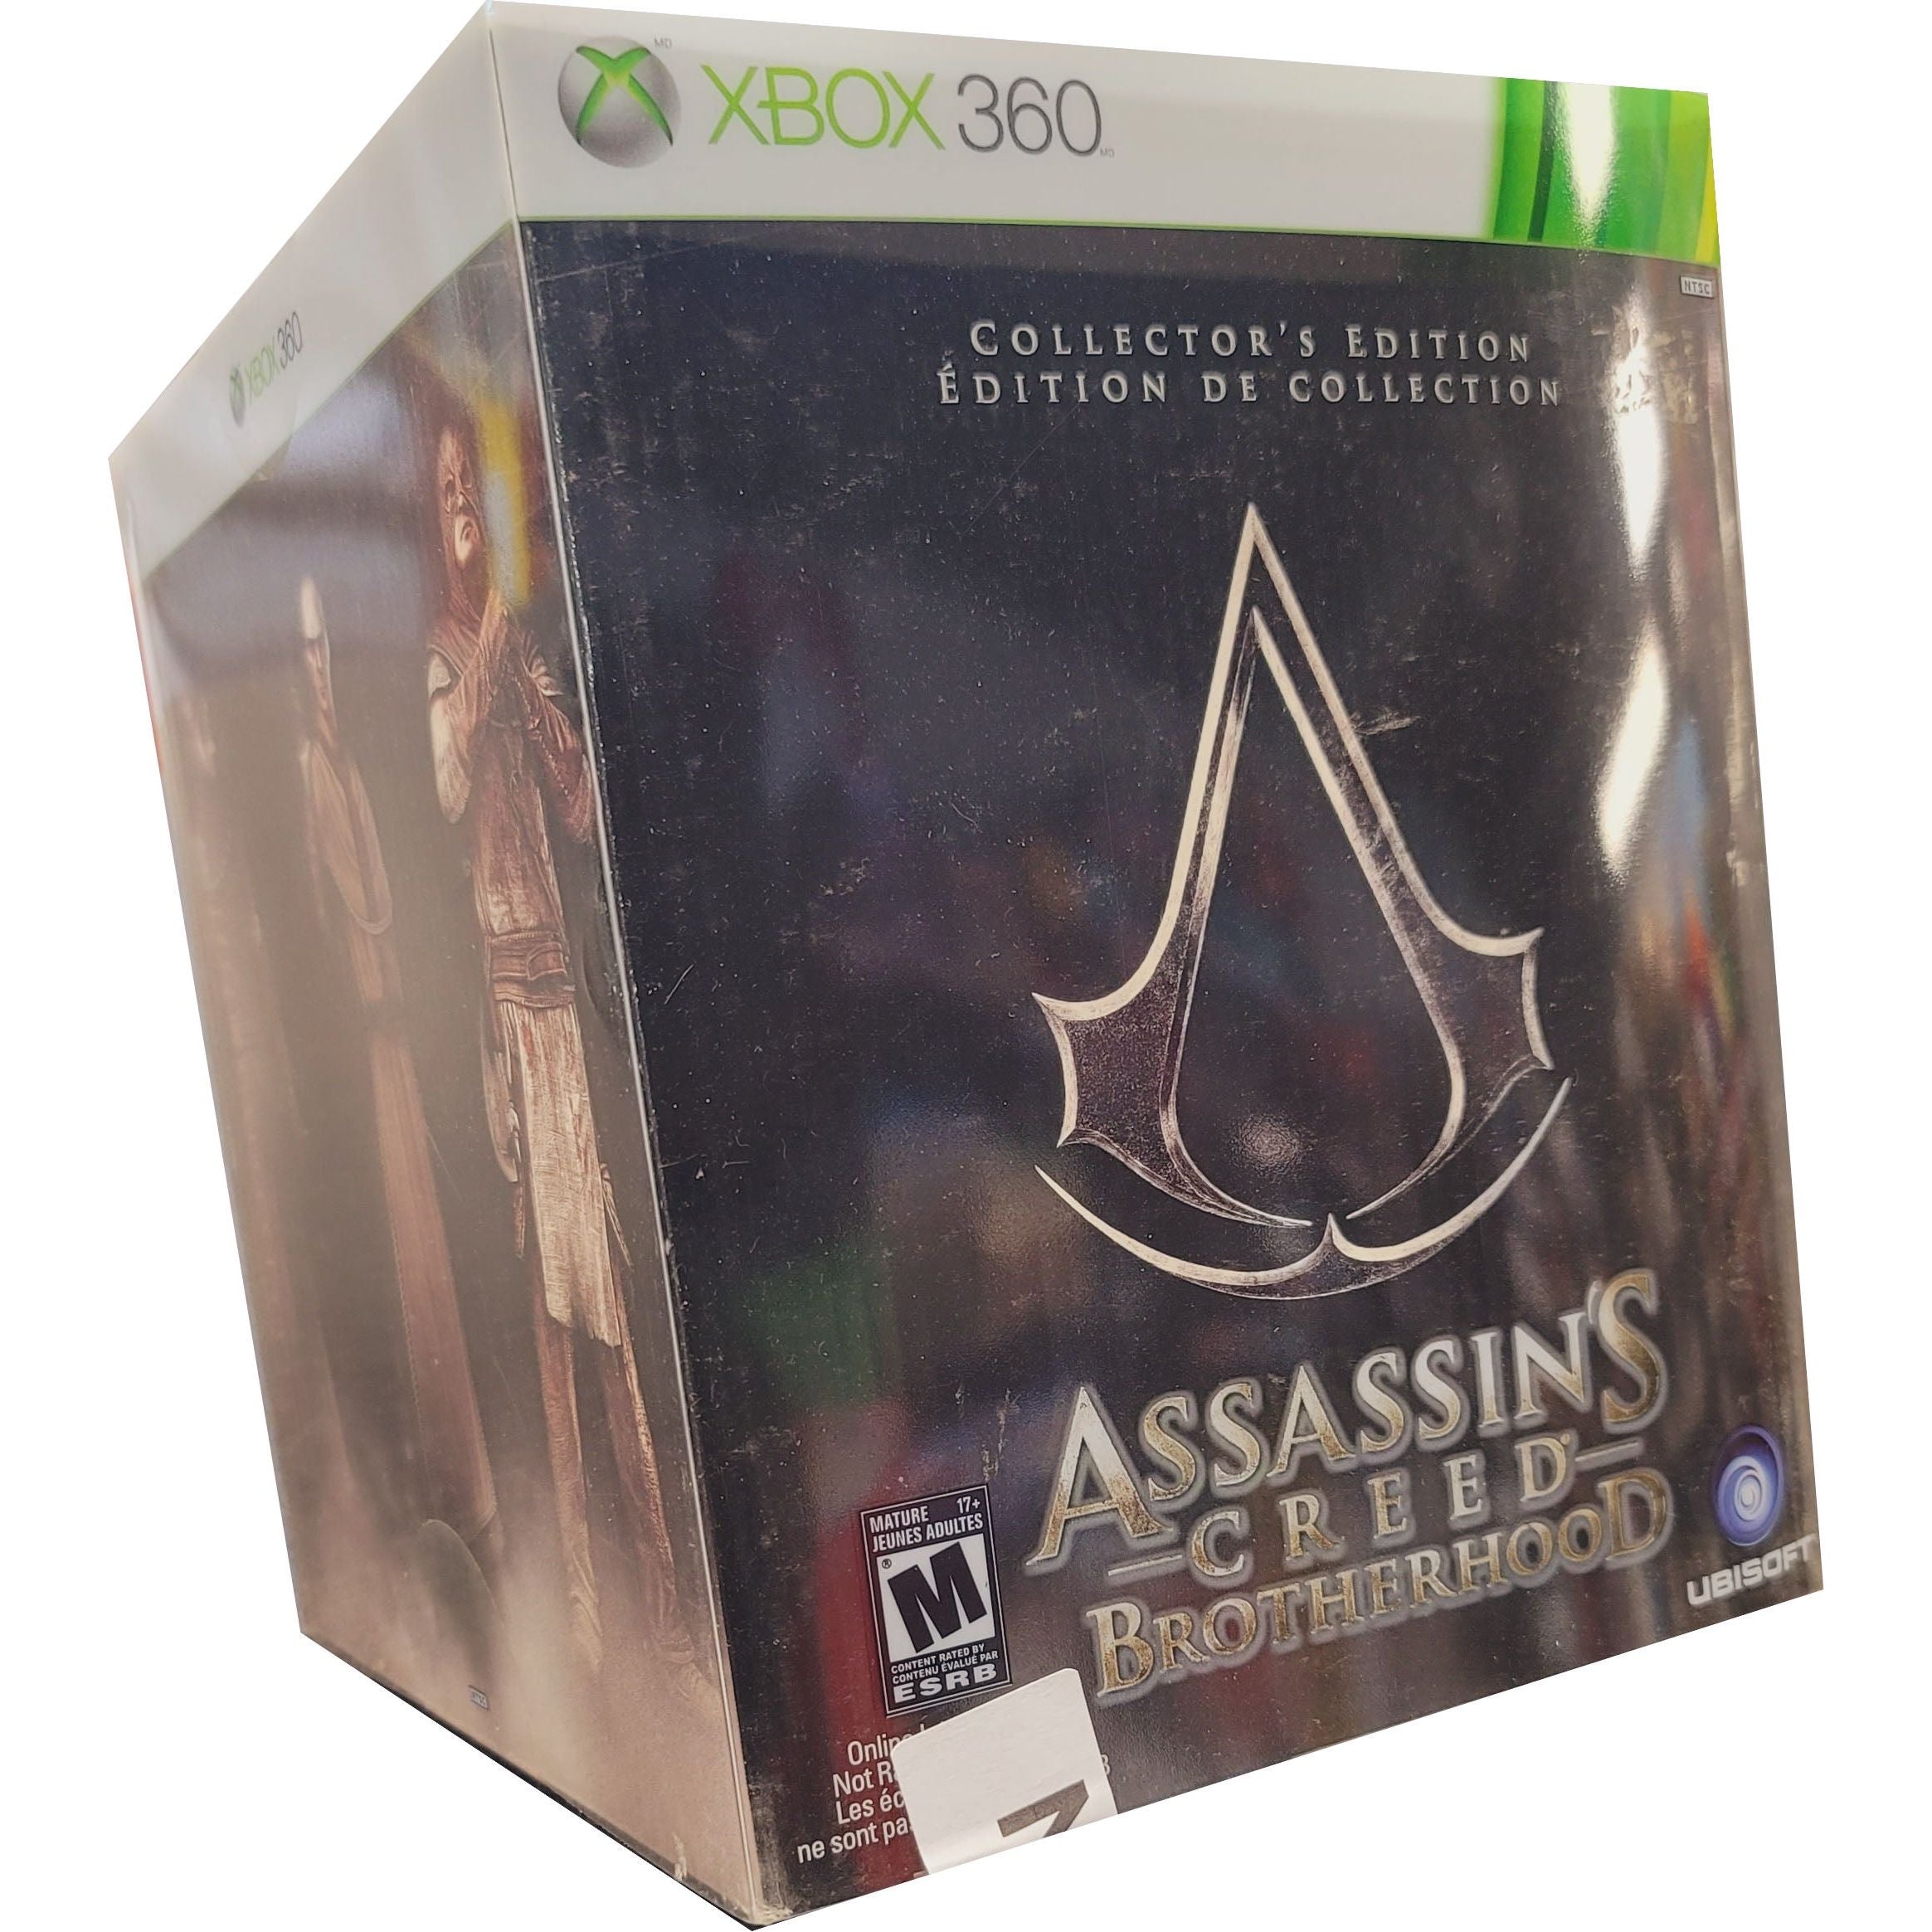 XBOX 360 - Assassin's Creed Brotherhood Collector's Edition (Sealed)